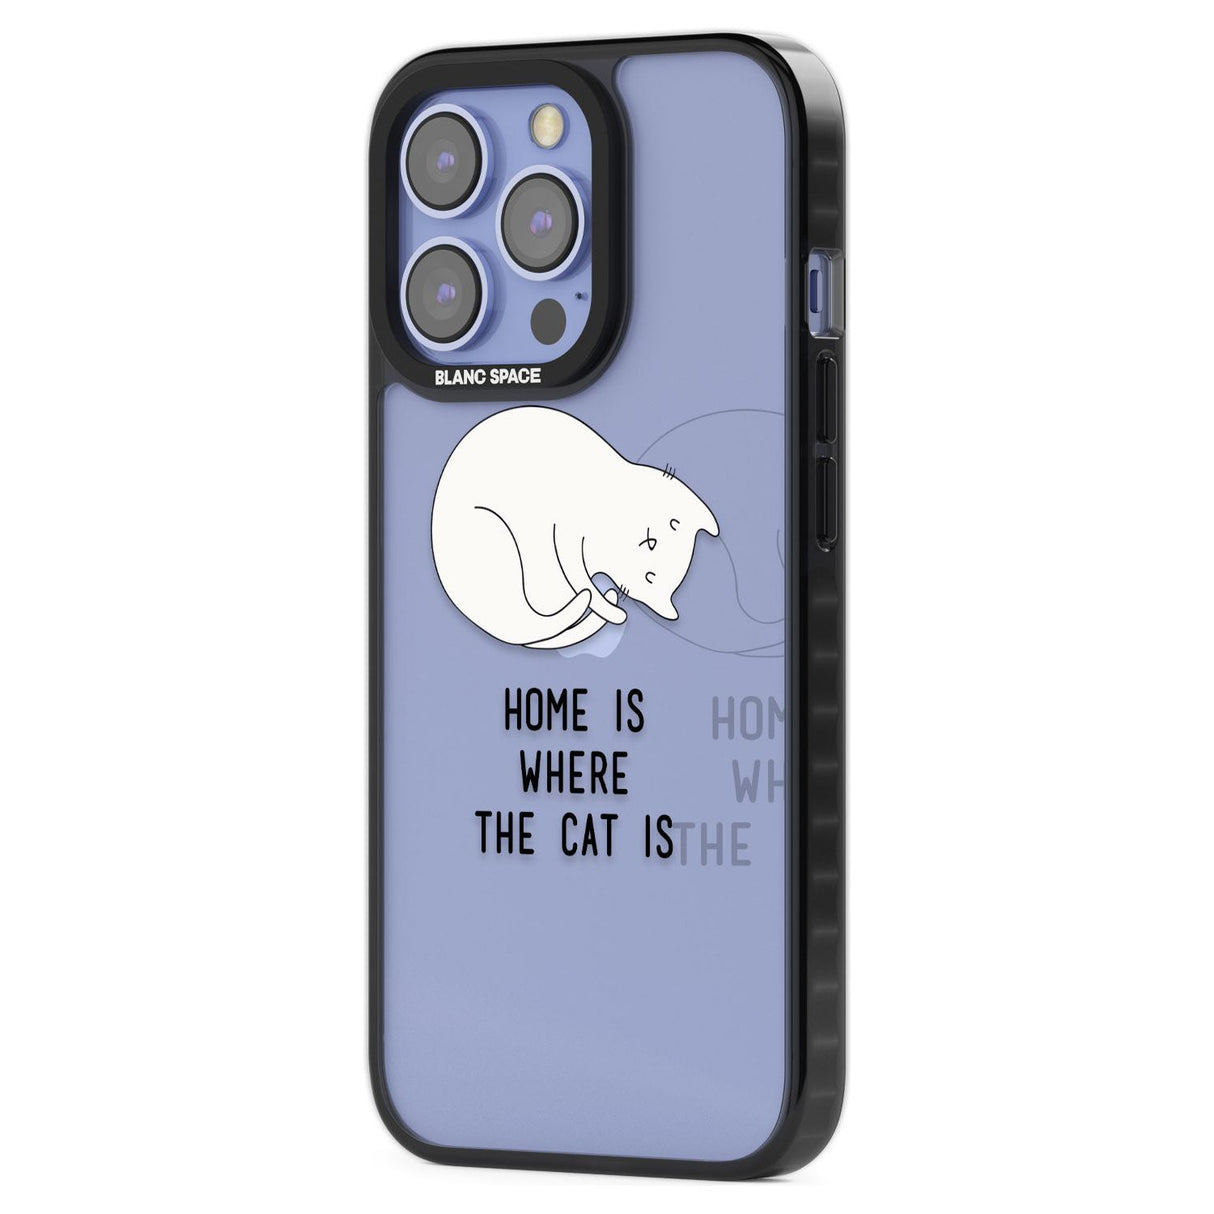 Home Is Where the Cat is Phone Case iPhone 15 Pro Max / Black Impact Case,iPhone 15 Plus / Black Impact Case,iPhone 15 Pro / Black Impact Case,iPhone 15 / Black Impact Case,iPhone 15 Pro Max / Impact Case,iPhone 15 Plus / Impact Case,iPhone 15 Pro / Impact Case,iPhone 15 / Impact Case,iPhone 15 Pro Max / Magsafe Black Impact Case,iPhone 15 Plus / Magsafe Black Impact Case,iPhone 15 Pro / Magsafe Black Impact Case,iPhone 15 / Magsafe Black Impact Case,iPhone 14 Pro Max / Black Impact Case,iPhone 14 Plus / Bl